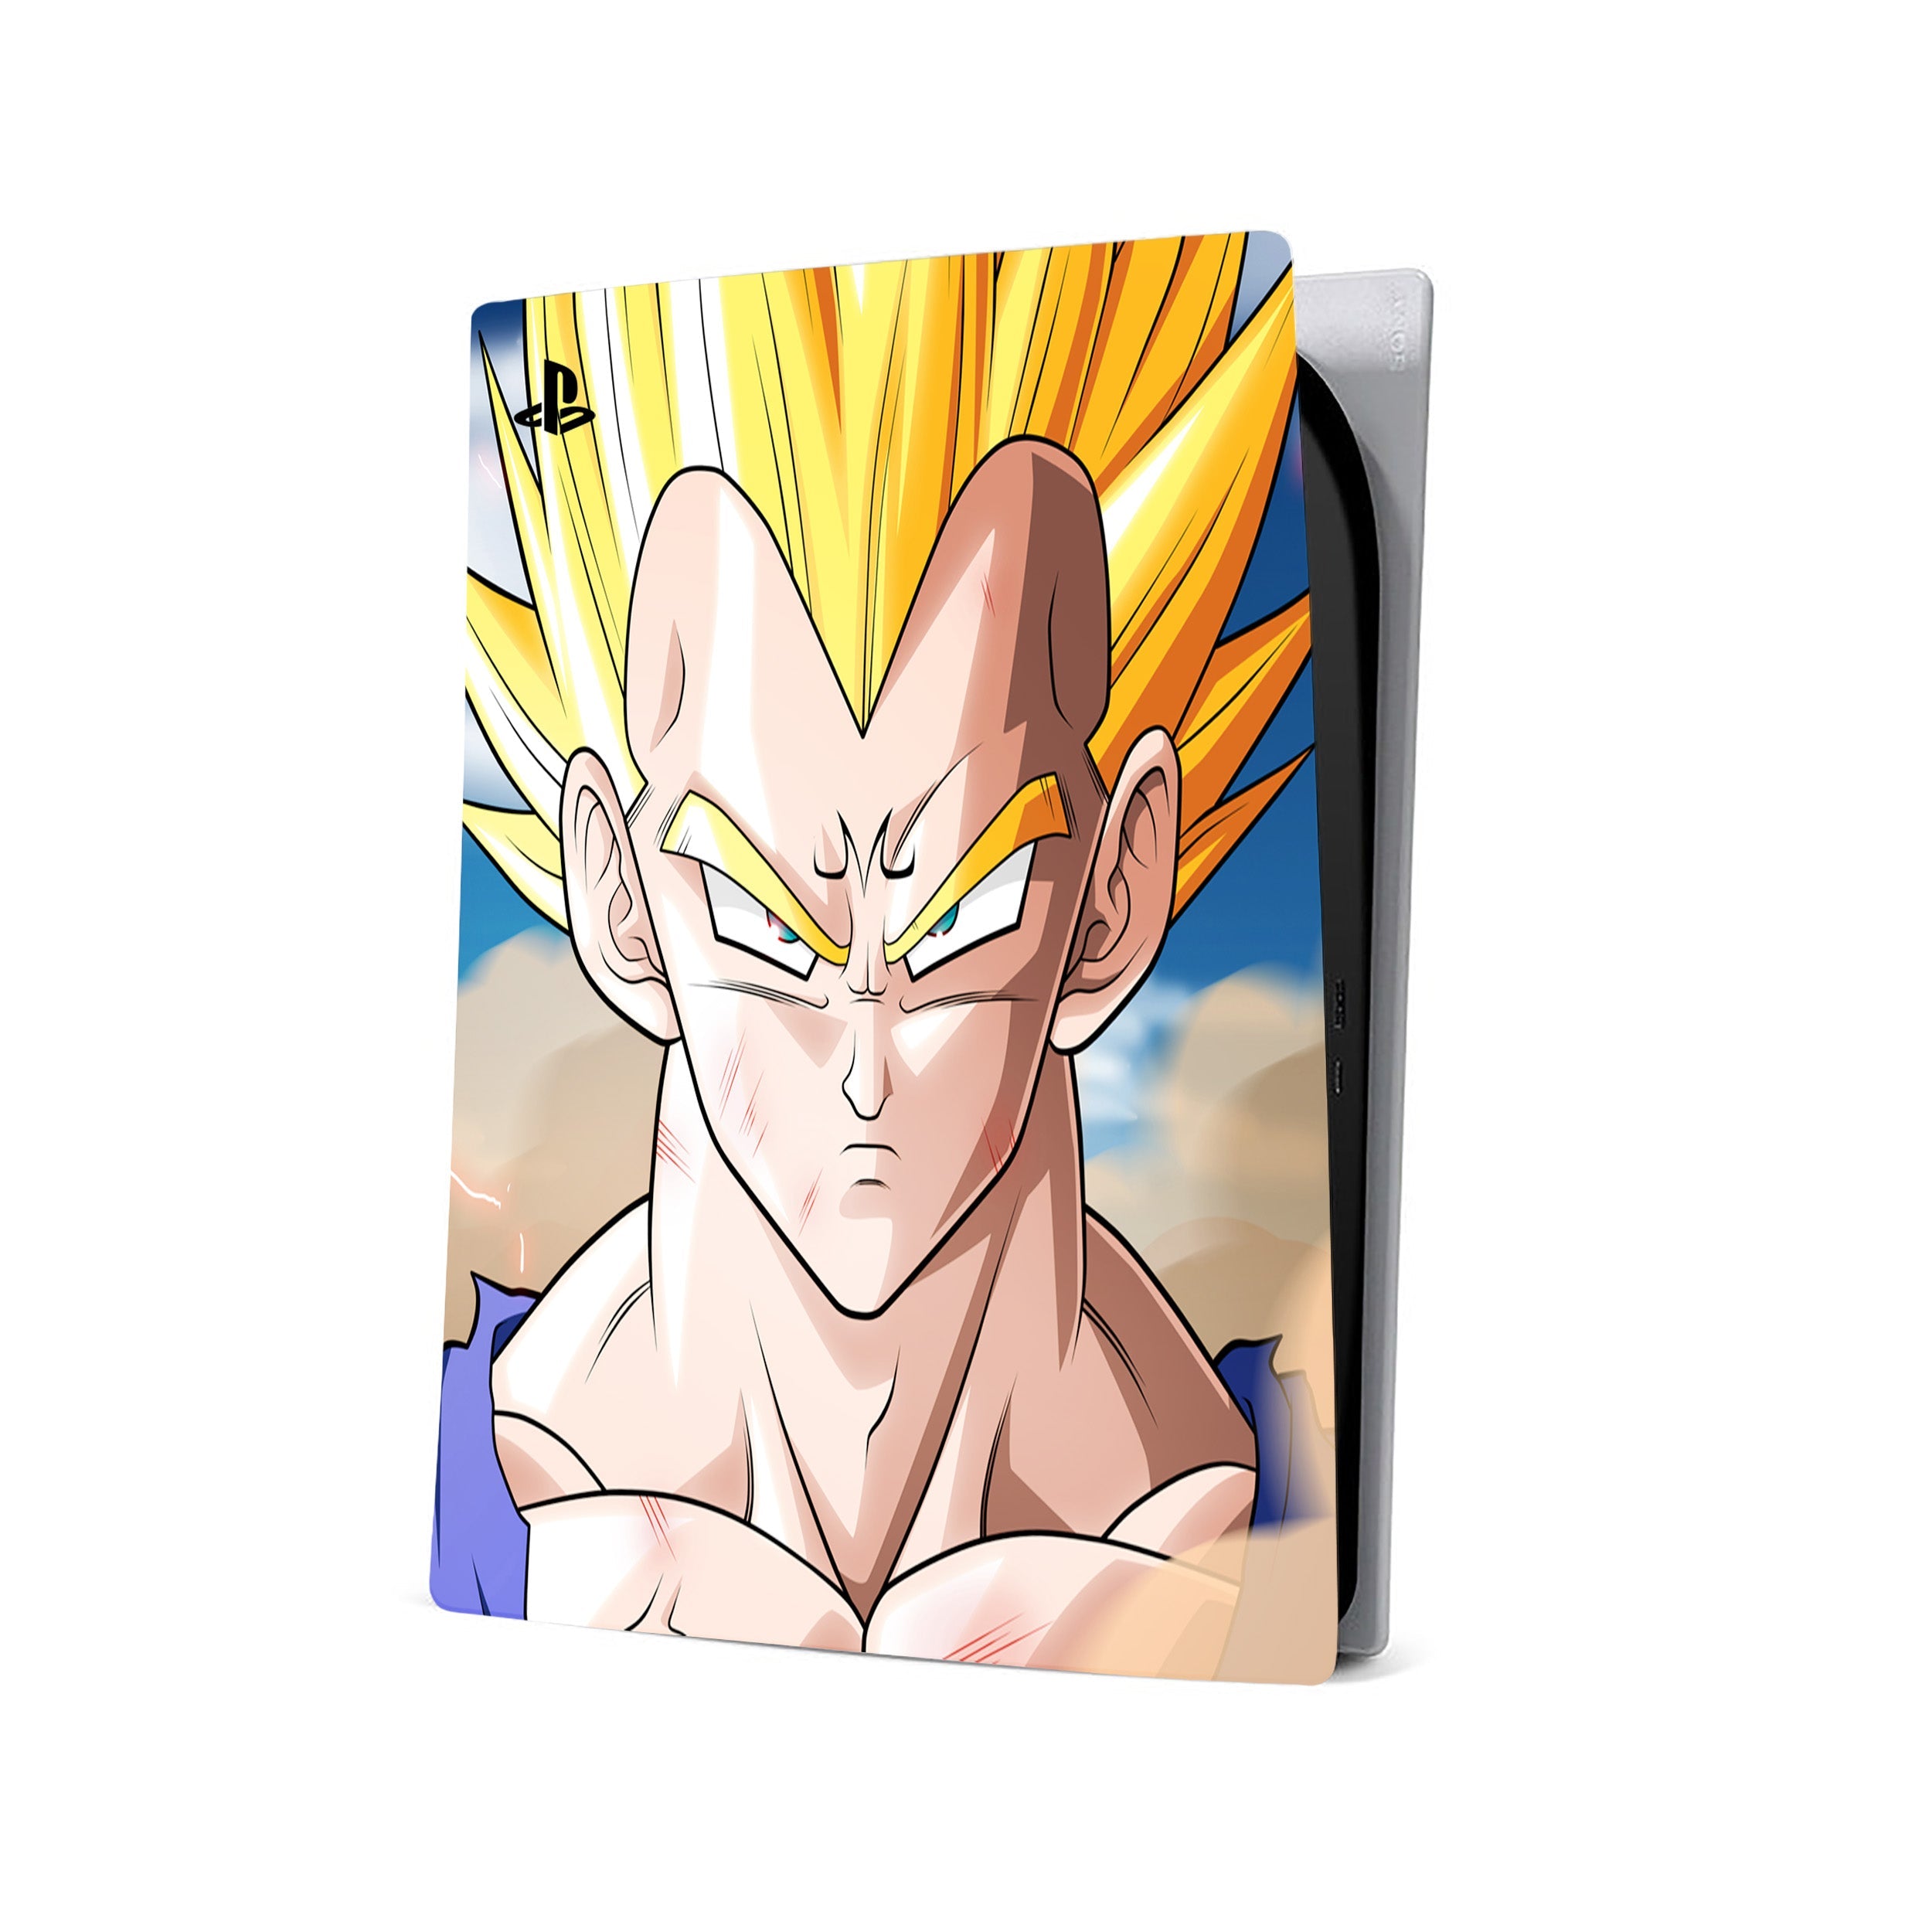 A video game skin featuring a Dragon Ball Z Vegeta design for the PS5.